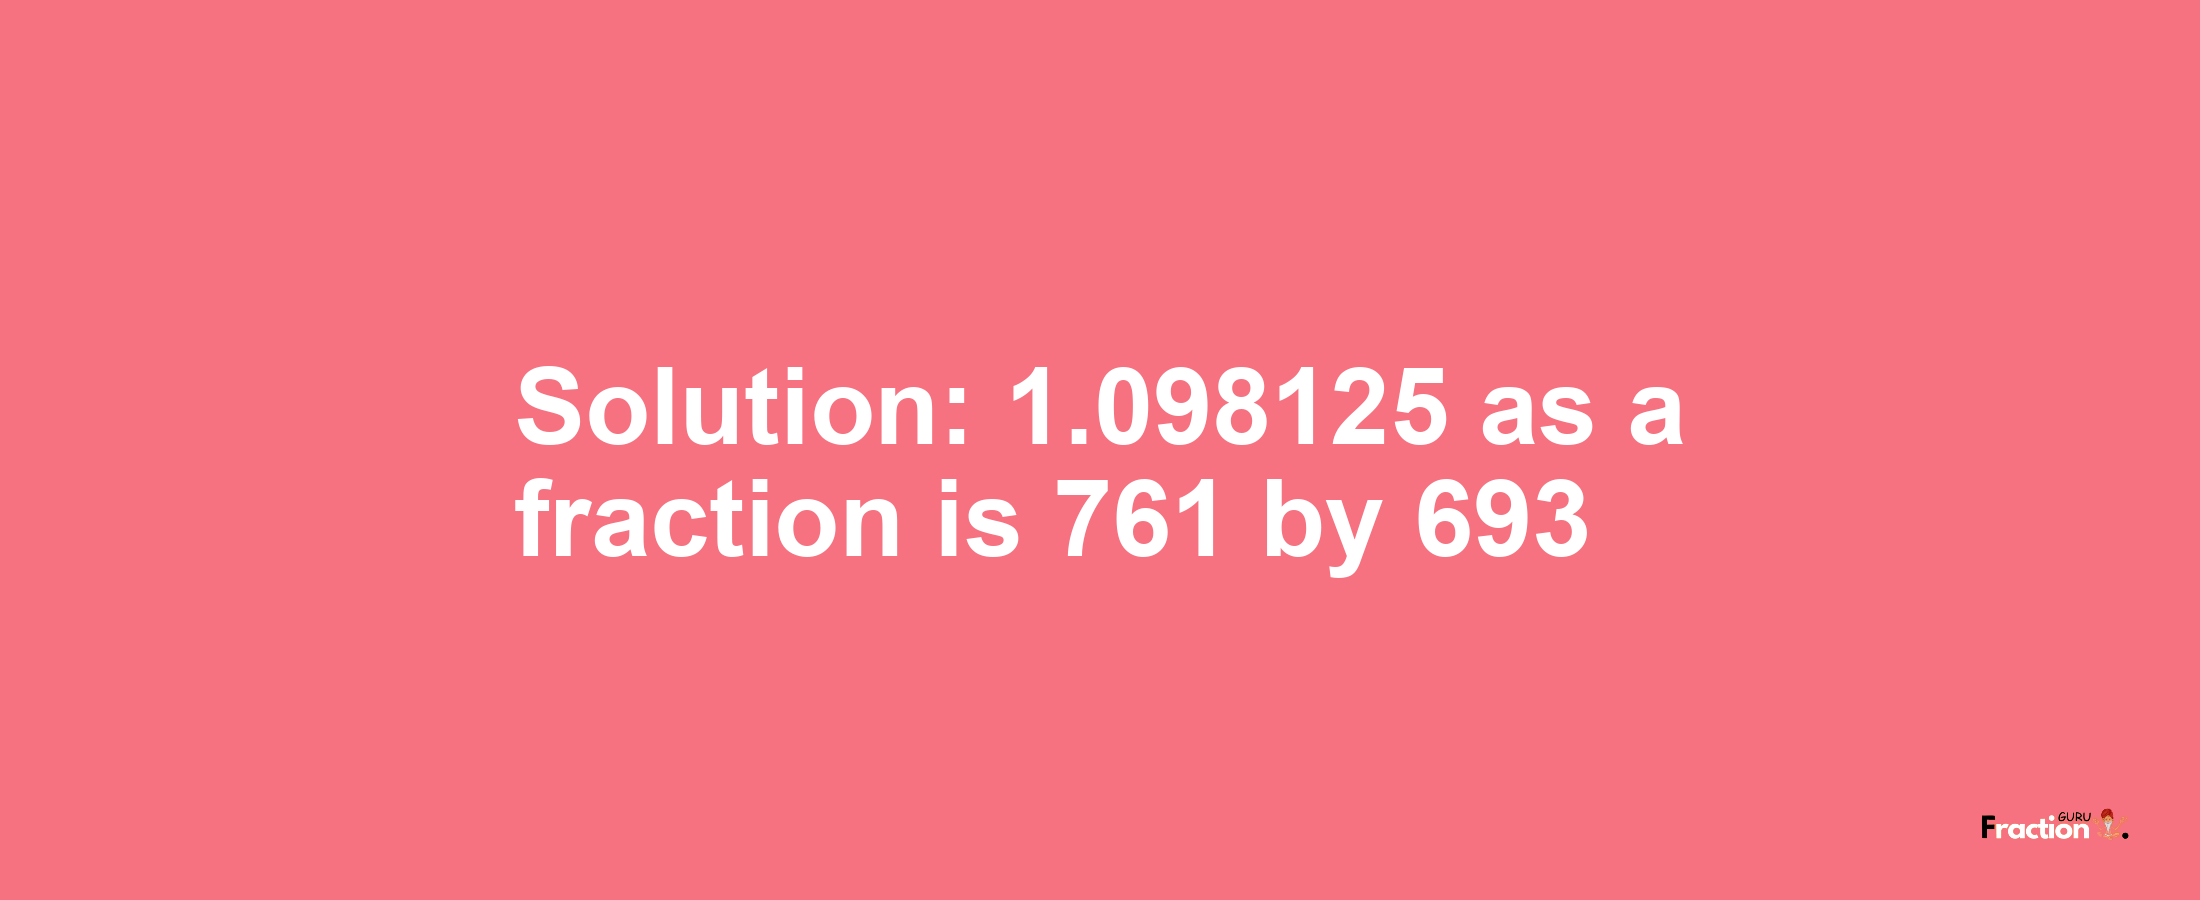 Solution:1.098125 as a fraction is 761/693